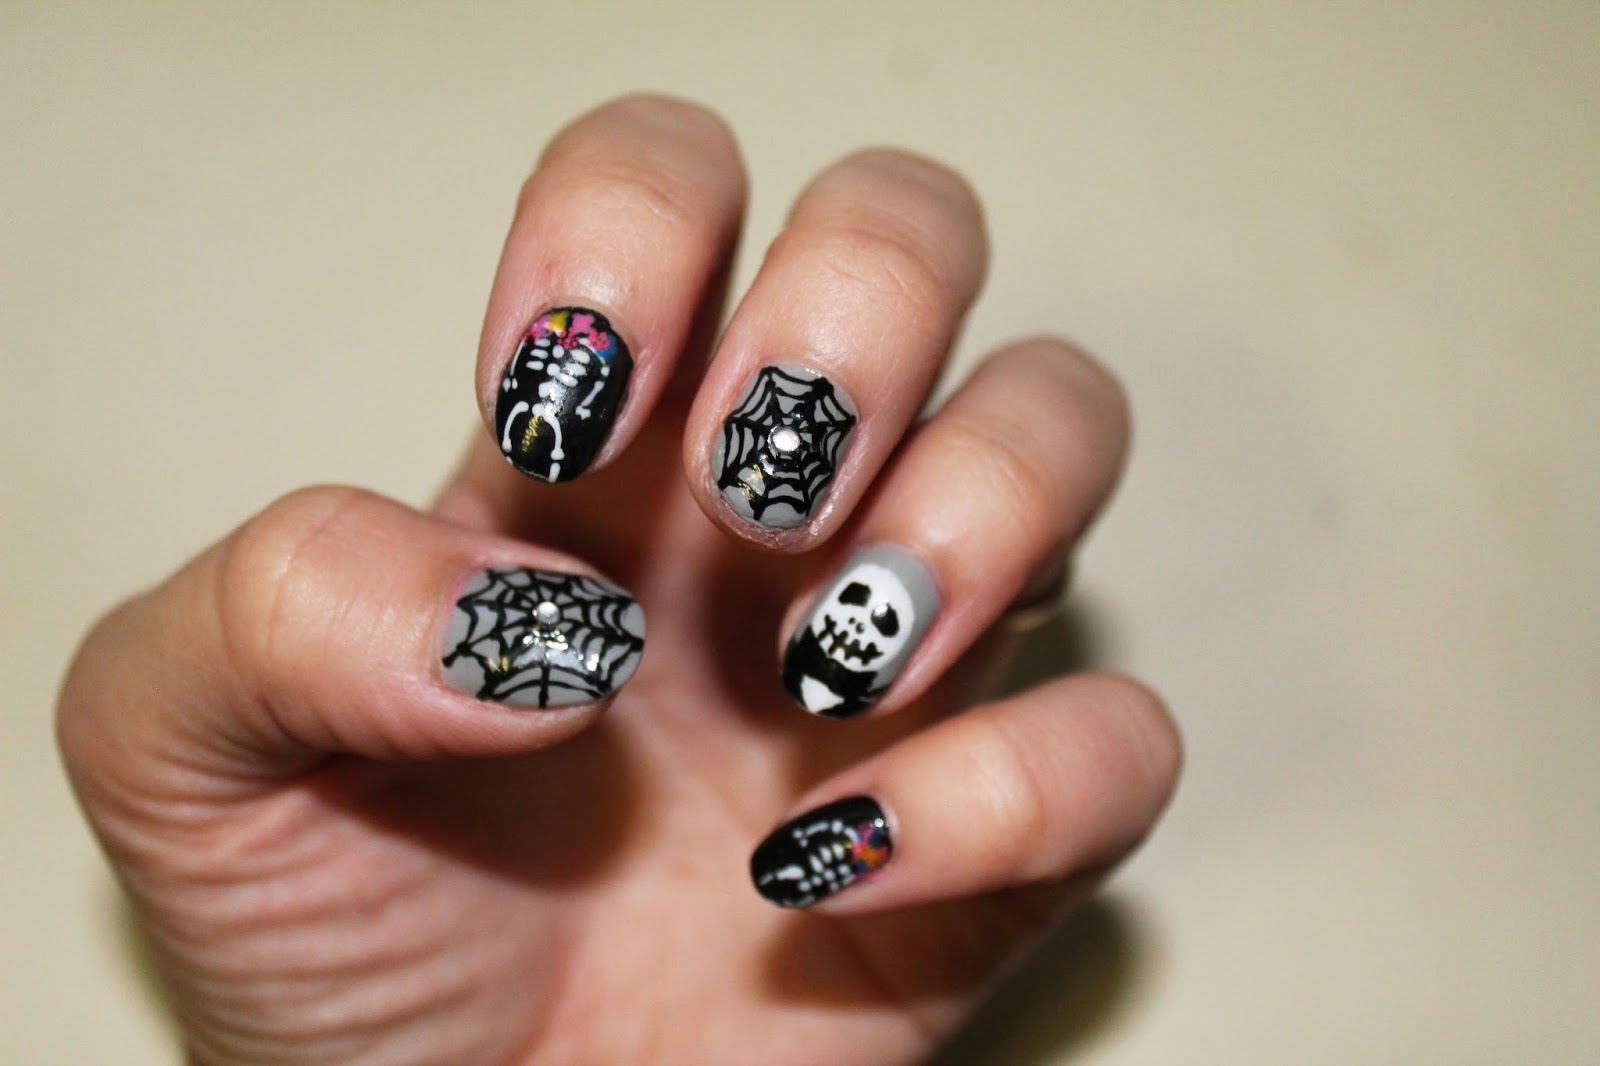 5. "Nightmare Before Christmas" Nail Art Compilation - wide 5